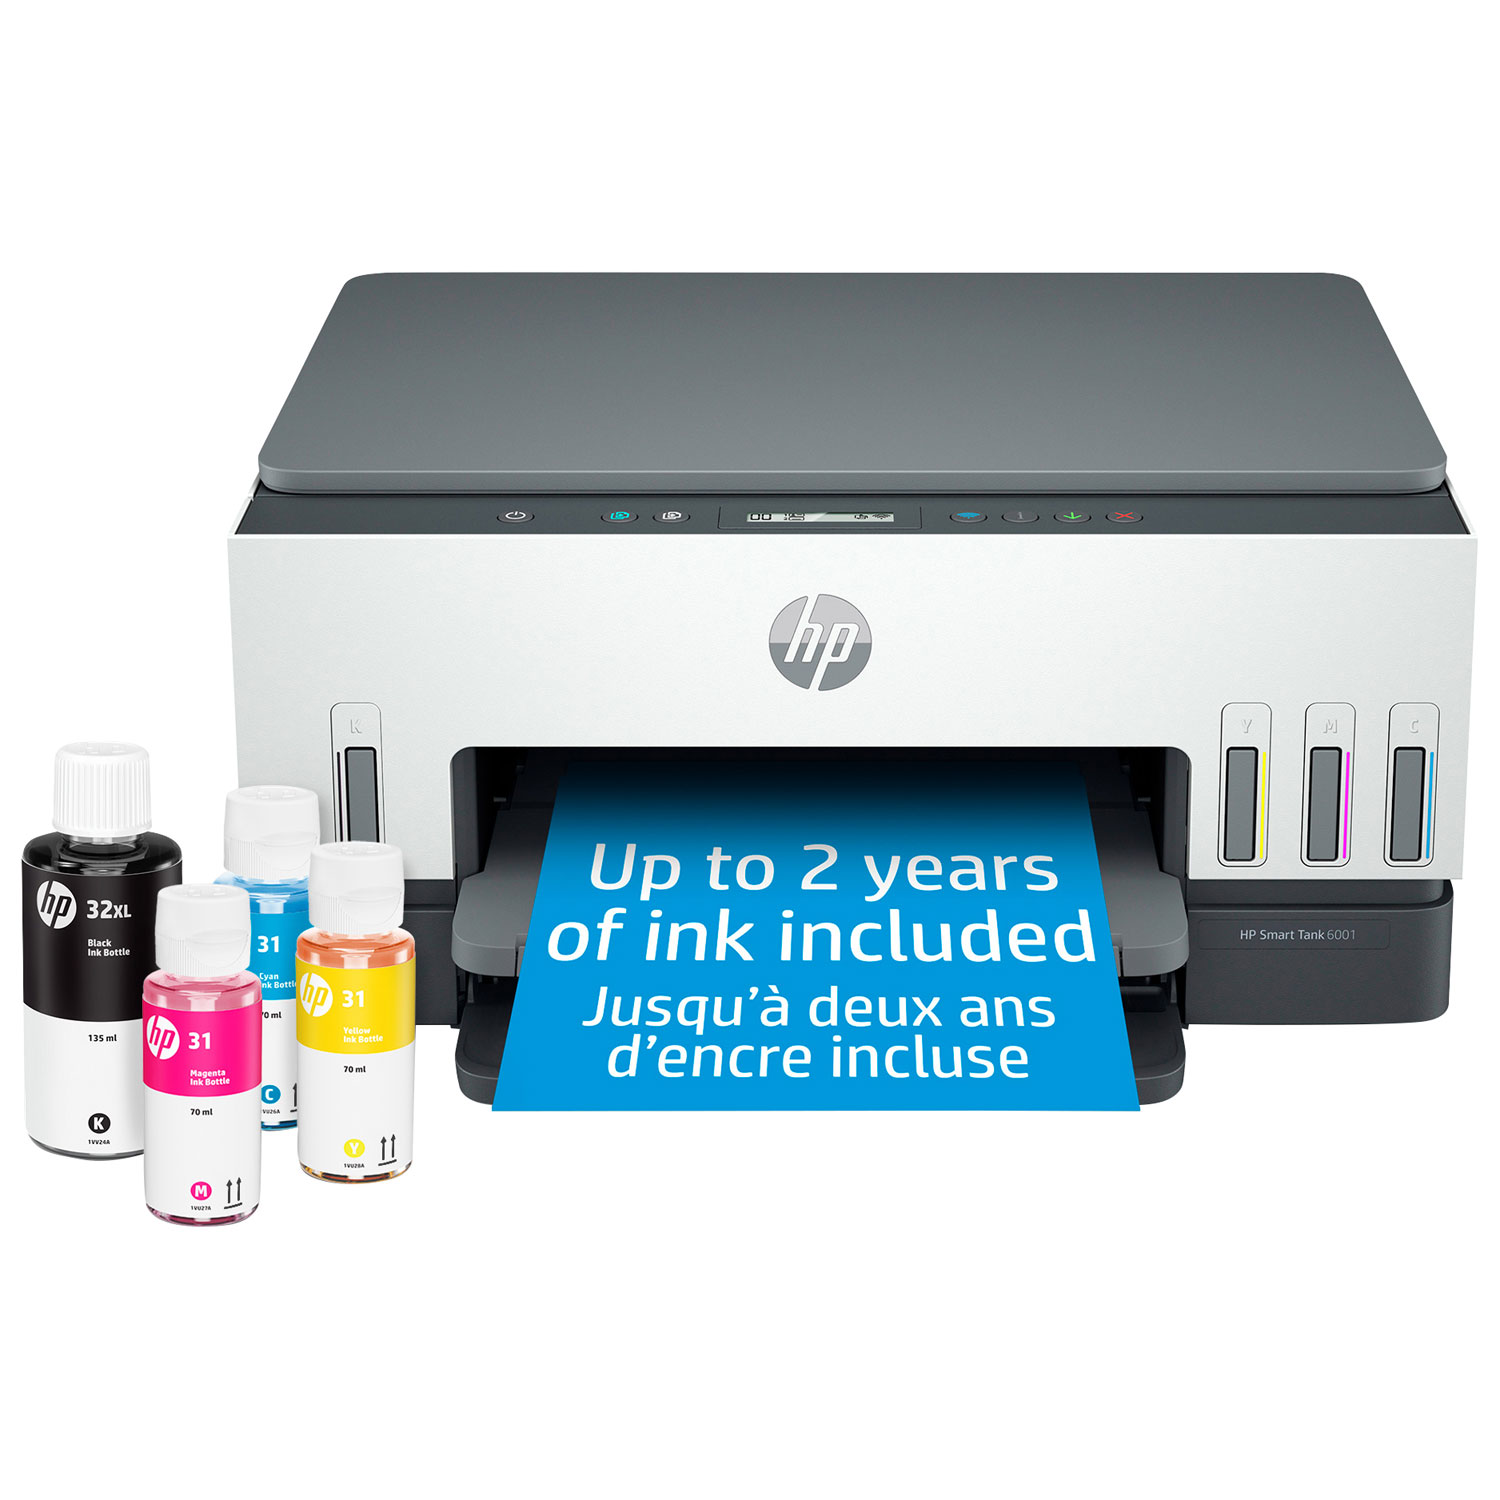 HP Smart Tank 6001 Wireless All-In-One Supertank Inkjet Printer - Up to 2 Years of Ink Included*